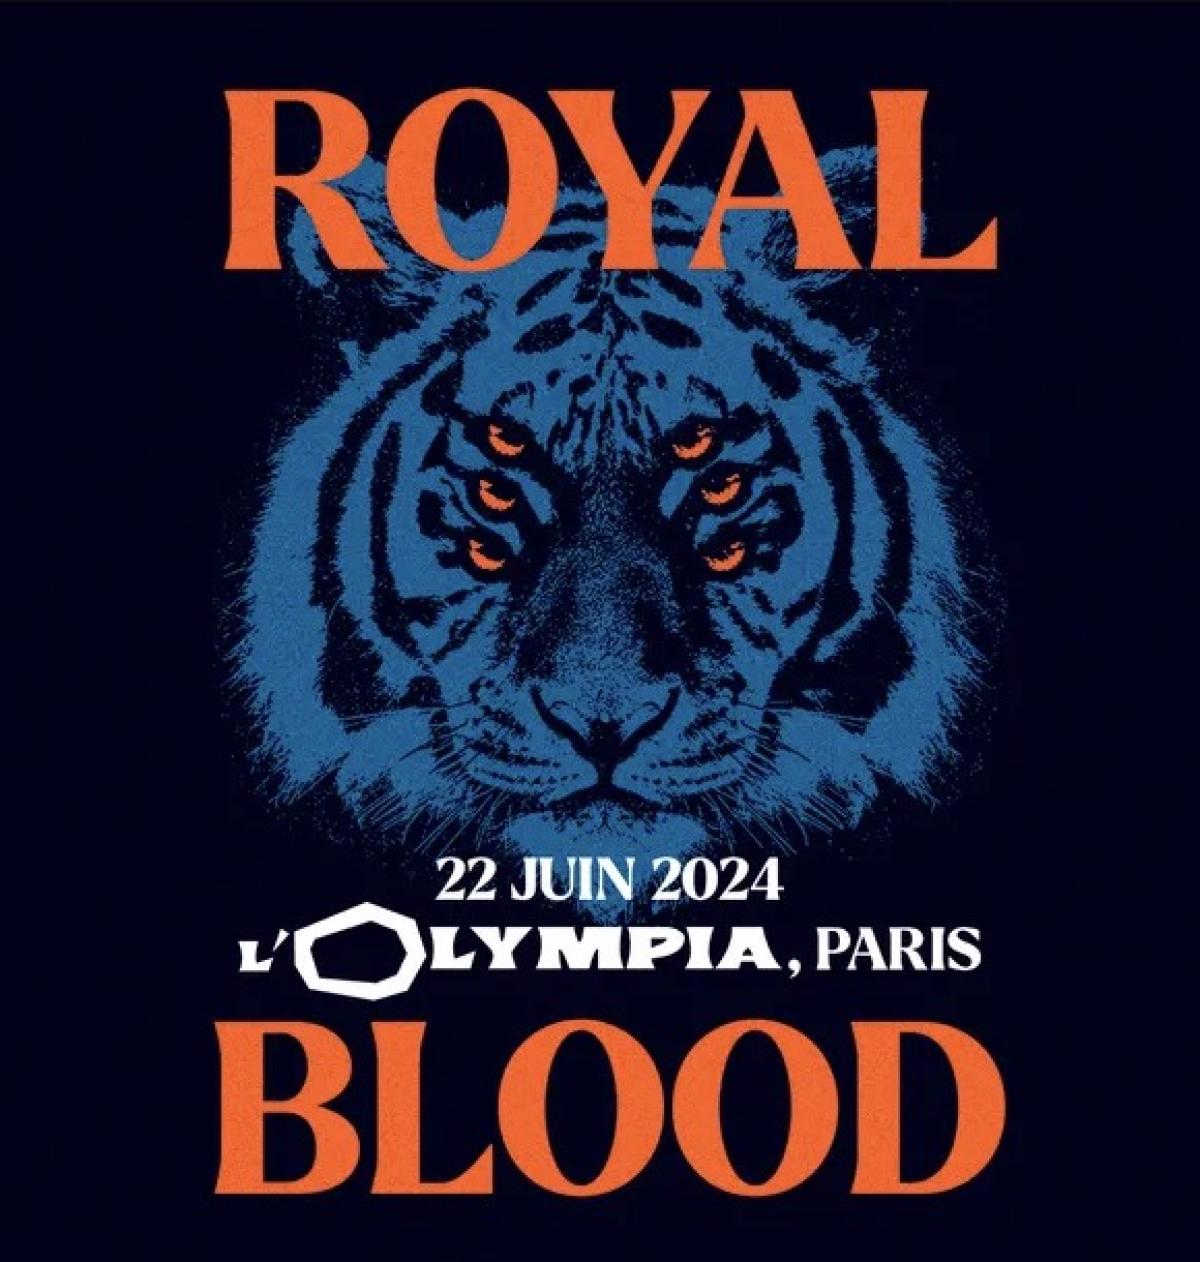 Royal Blood at Olympia Tickets